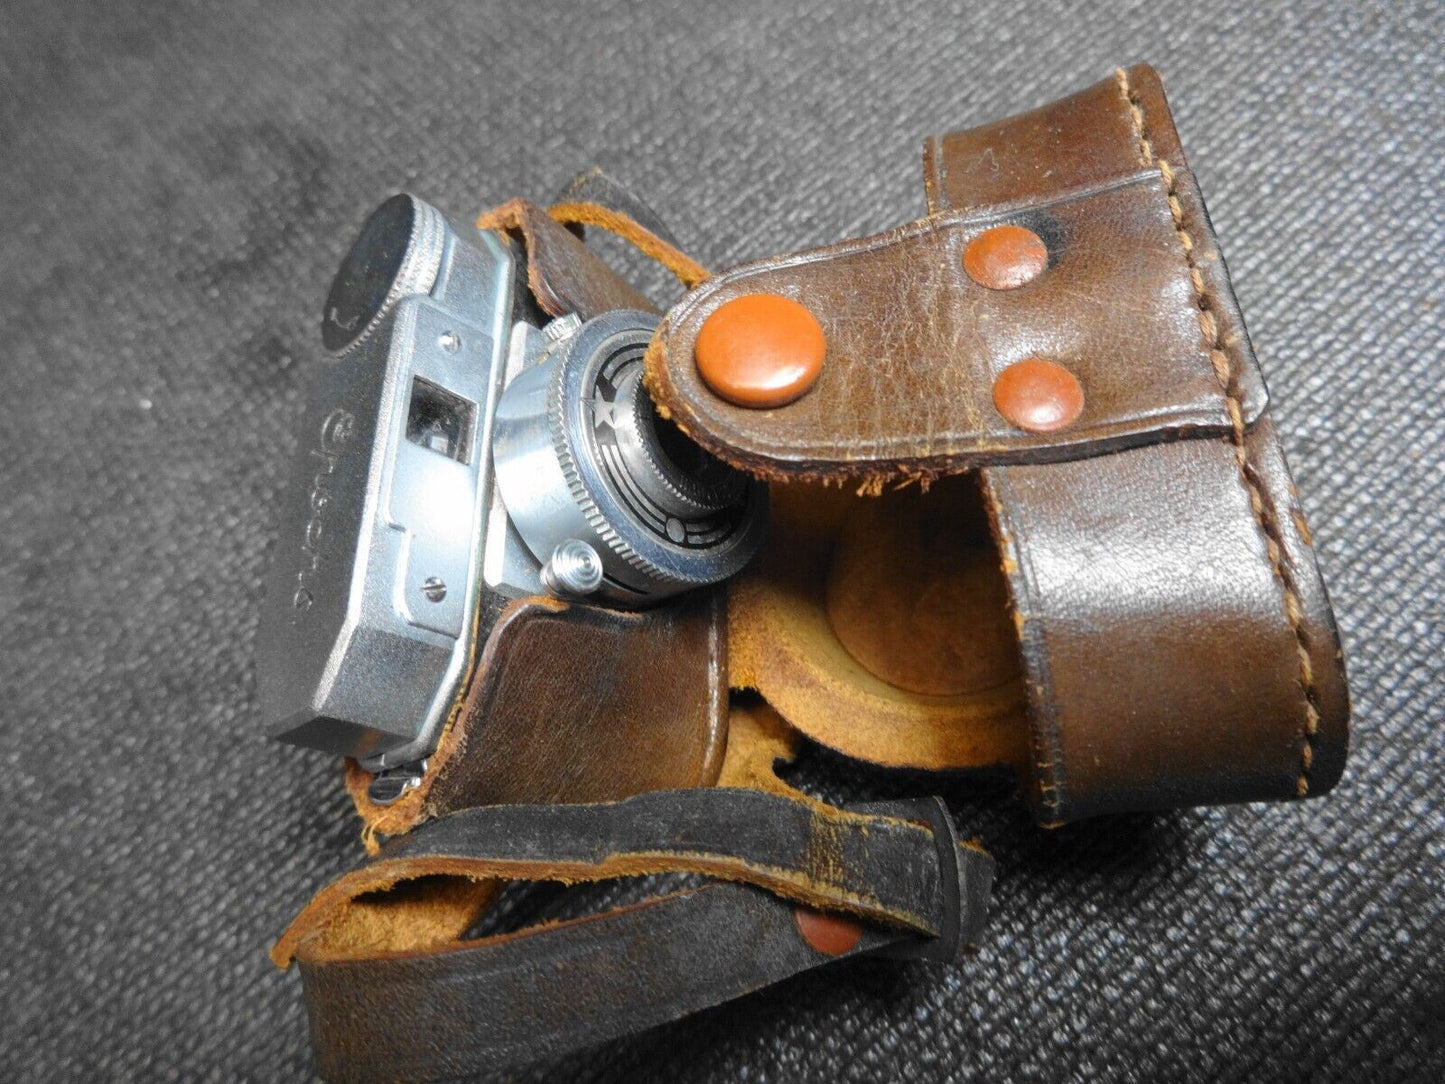 RARE EPOCHS 1948 SUBMINITURE CAMERA MADE IN OCCUPY JAPAN